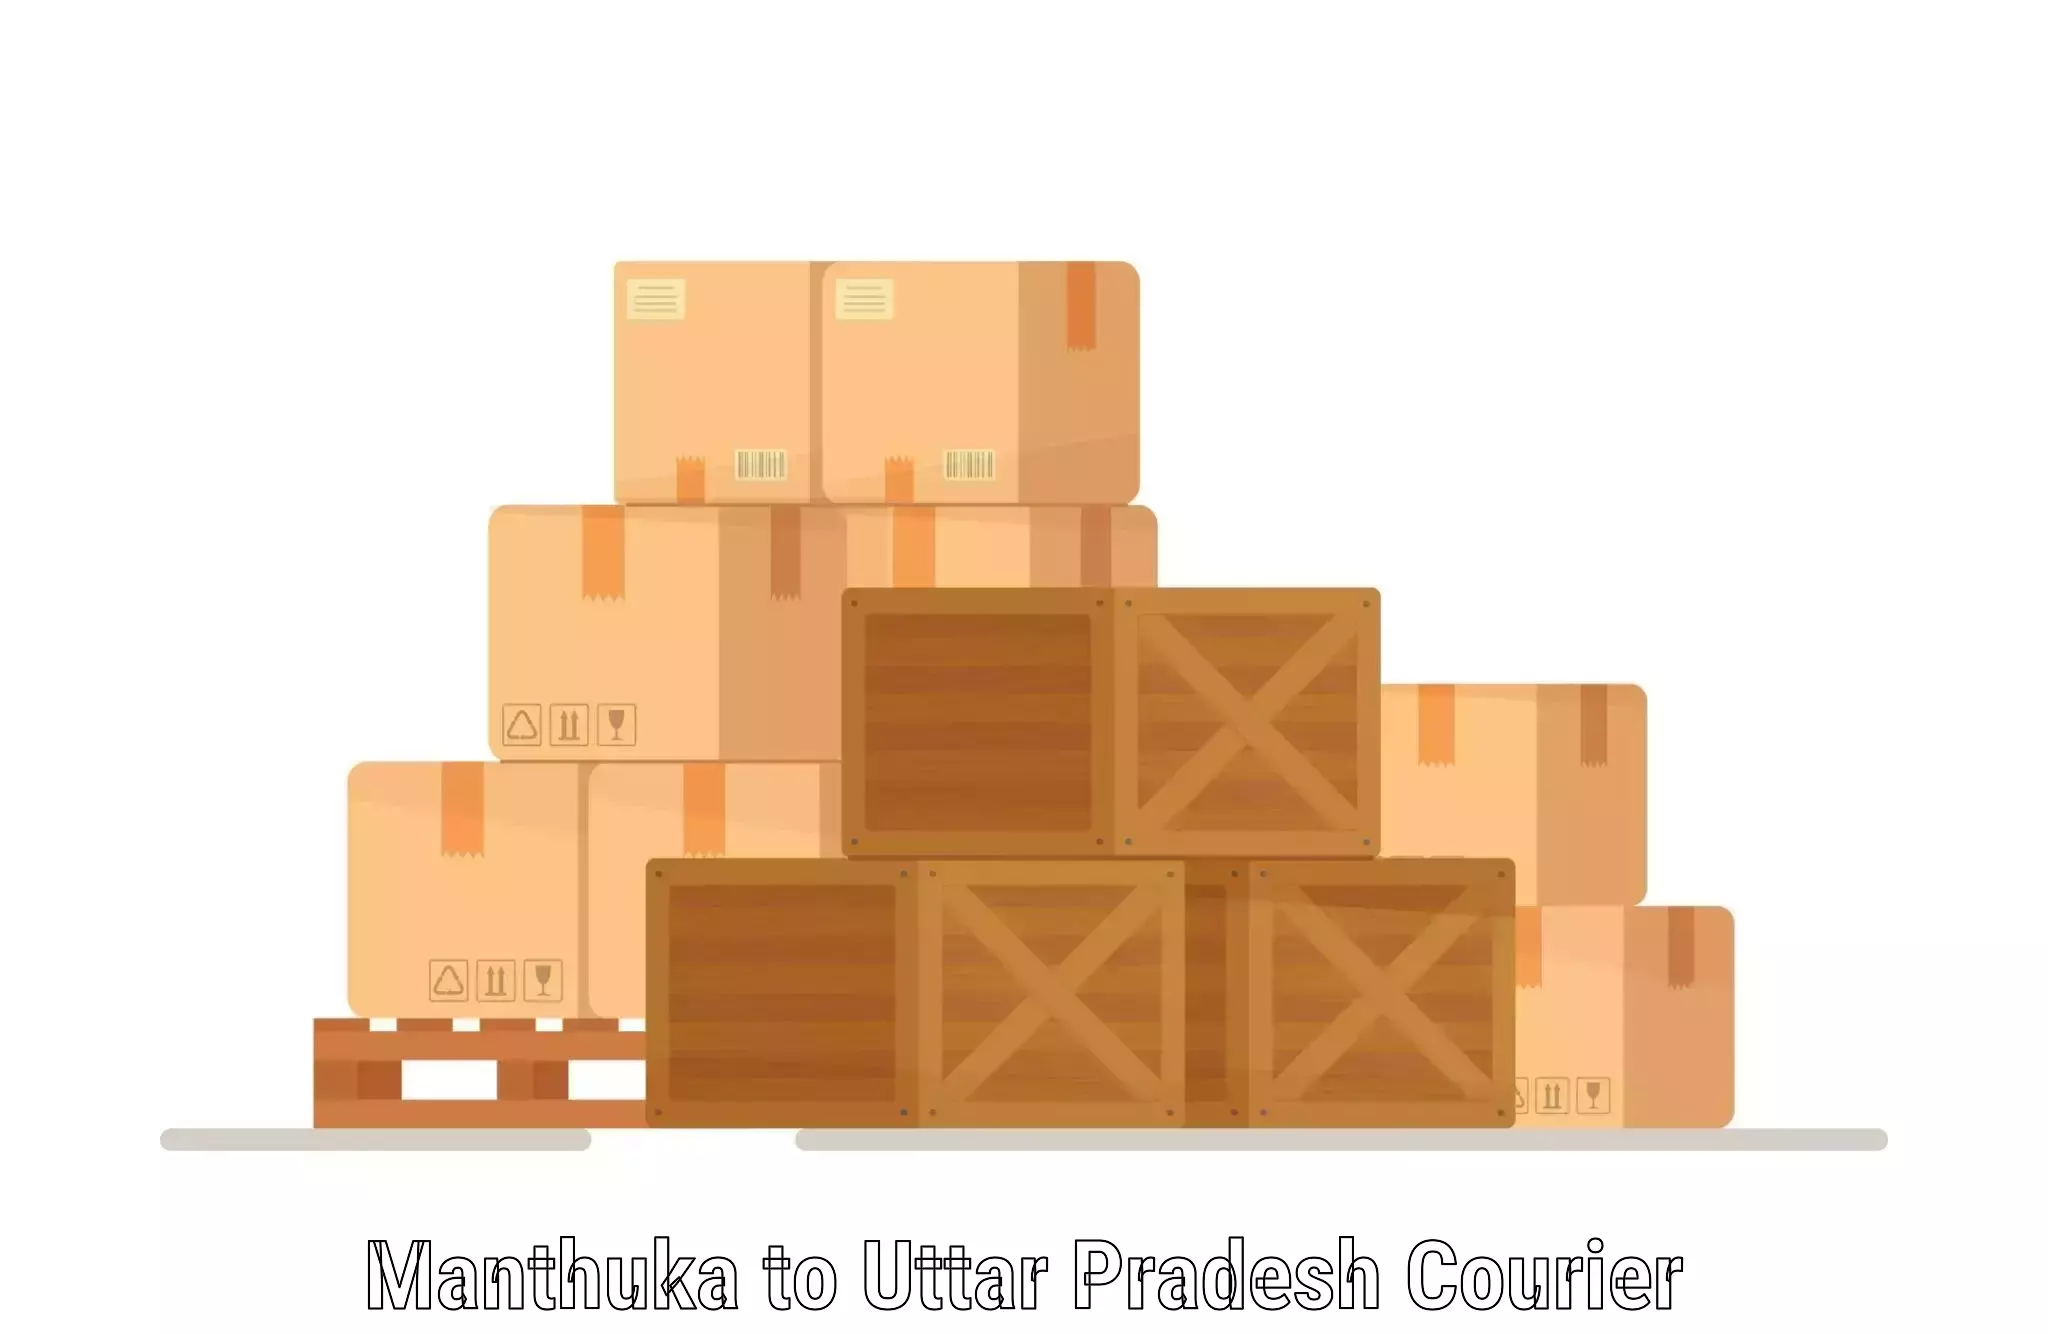 Full-service courier options Manthuka to Noida